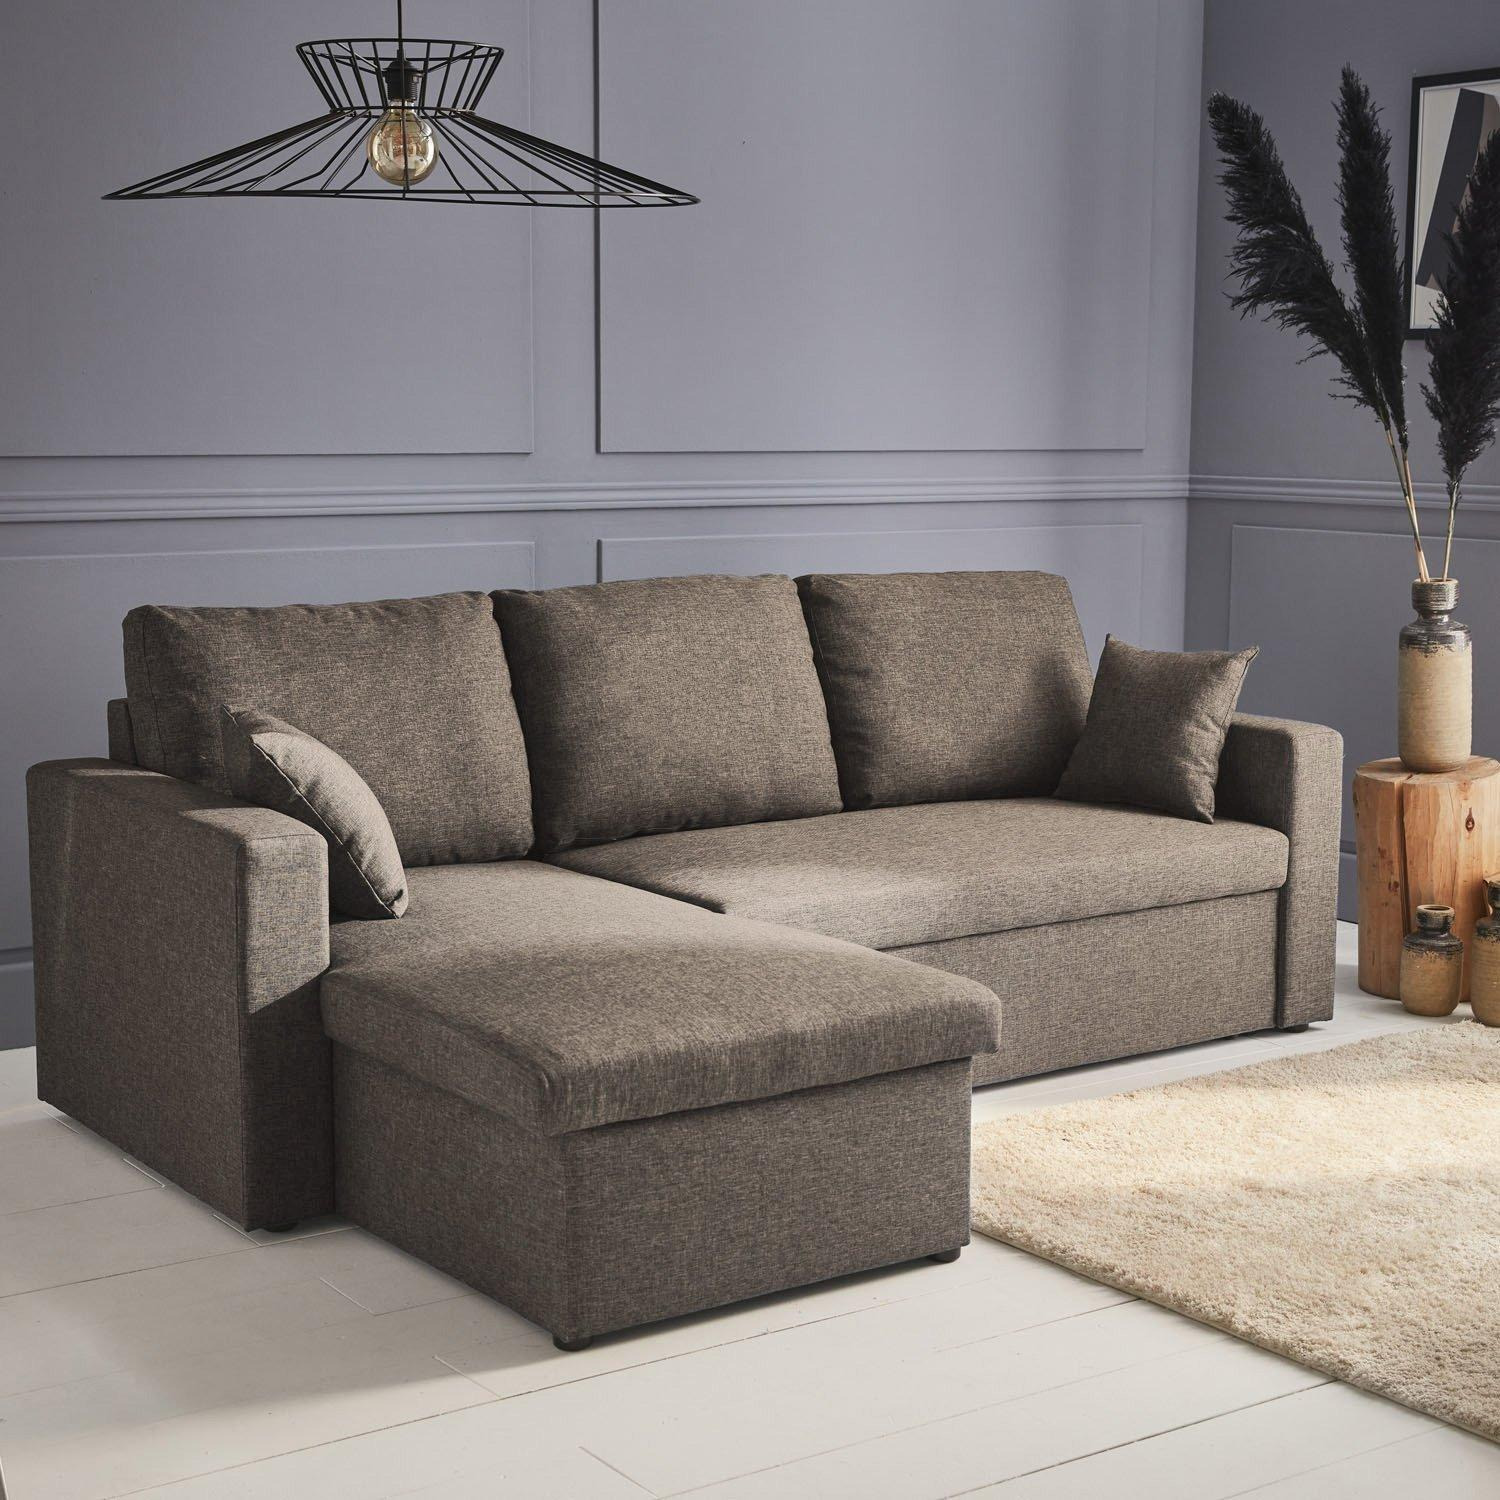 3-seater Reversible Corner Sofa Bed With Storage - image 1